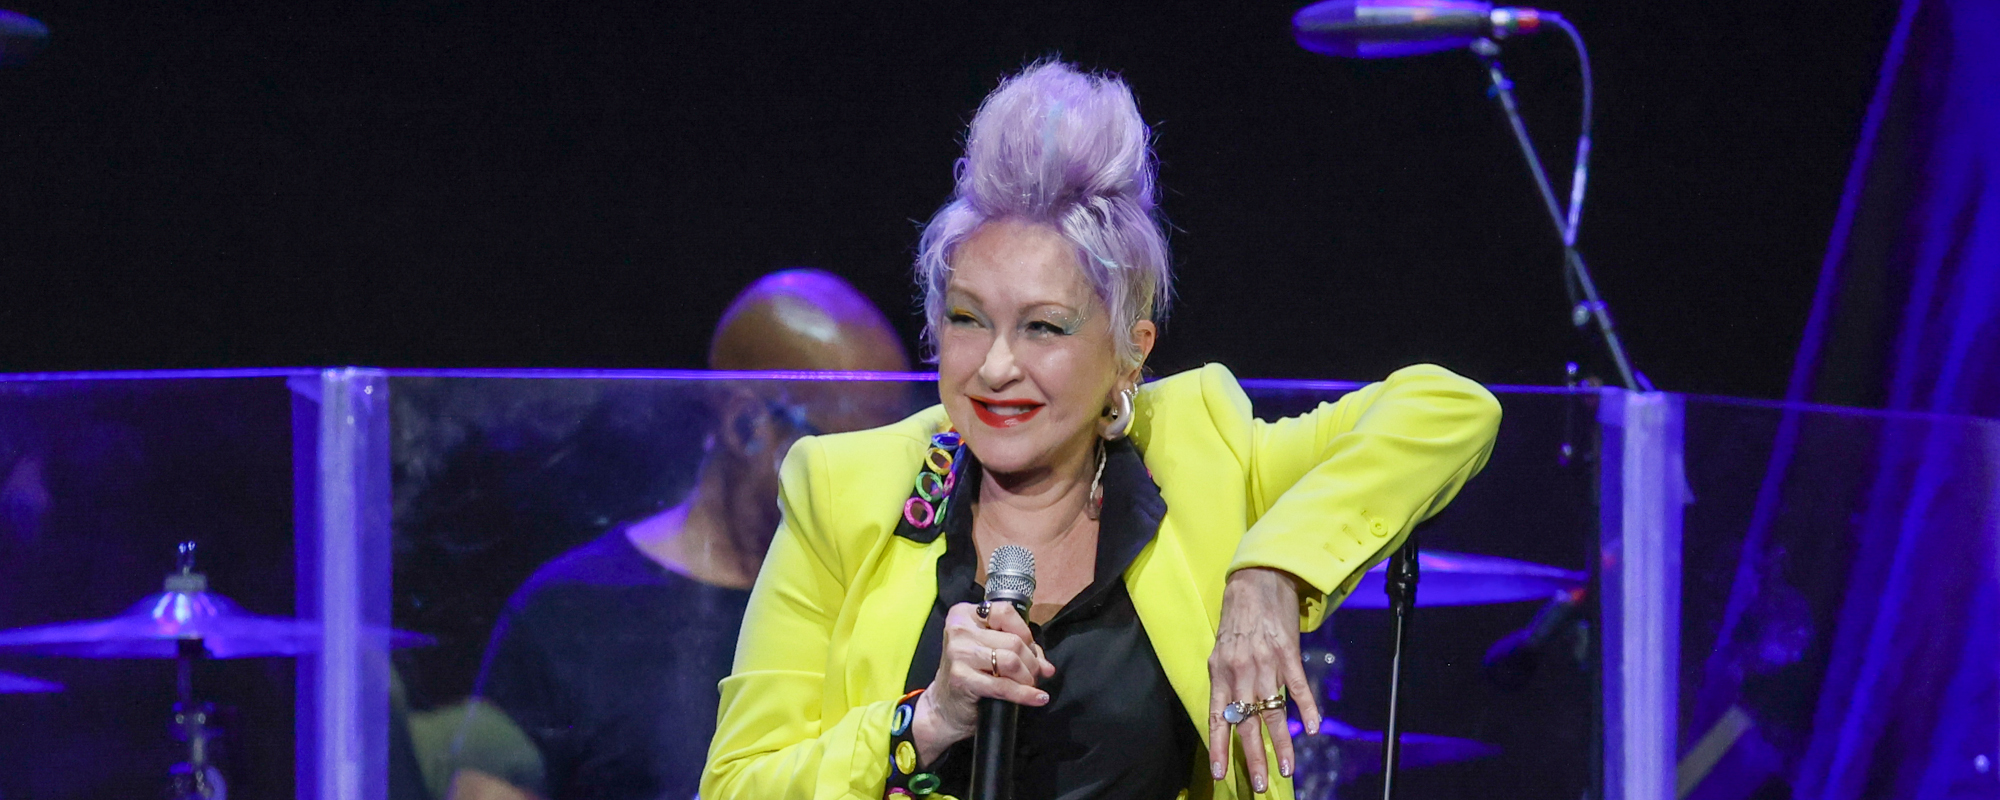 Cyndi Lauper on Not Being Inducted into Rock Hall of Fame—”As a Rocker, You Have to be an Activist”